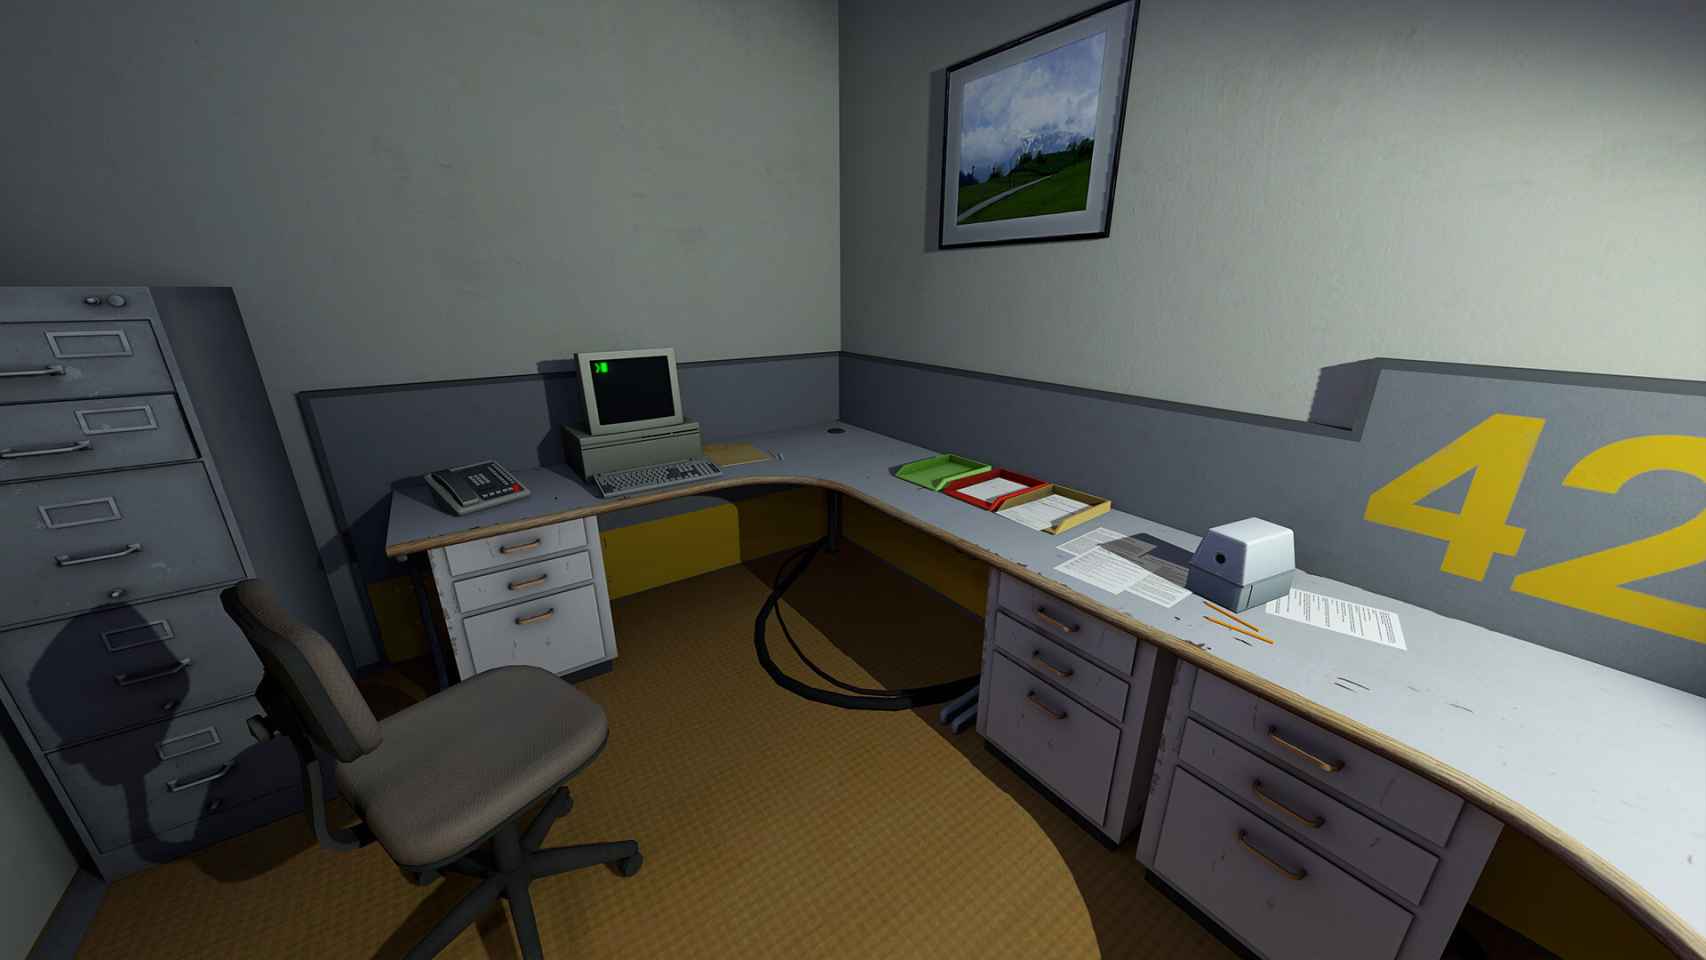 'The Stanley Parable'